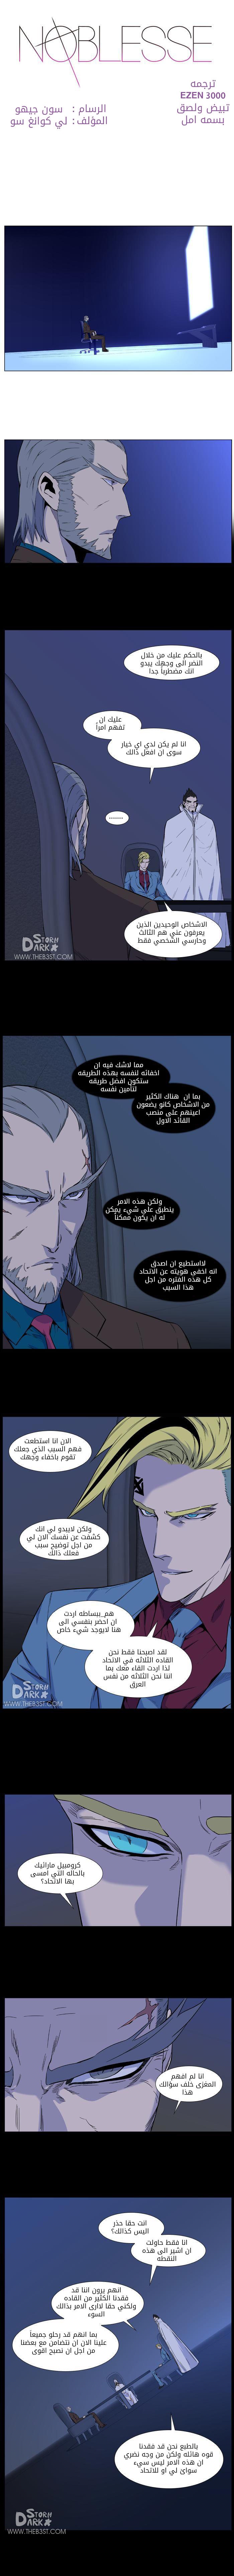 Noblesse: Chapter 485 - Page 1